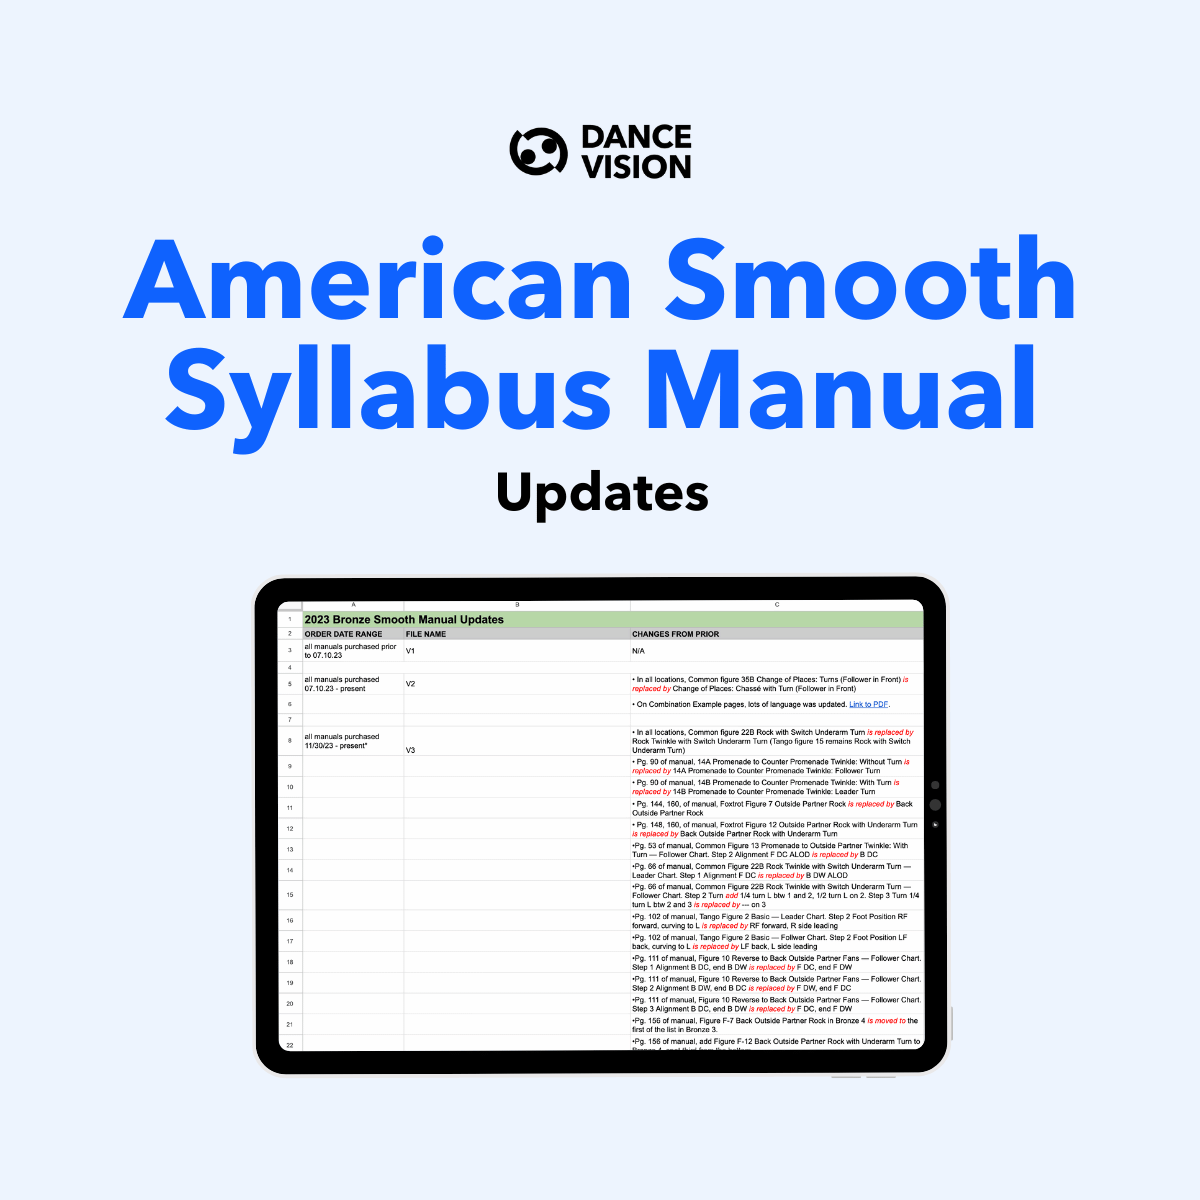 A spreadsheet to track the updates to the American Smooth Syllabus Manuals.